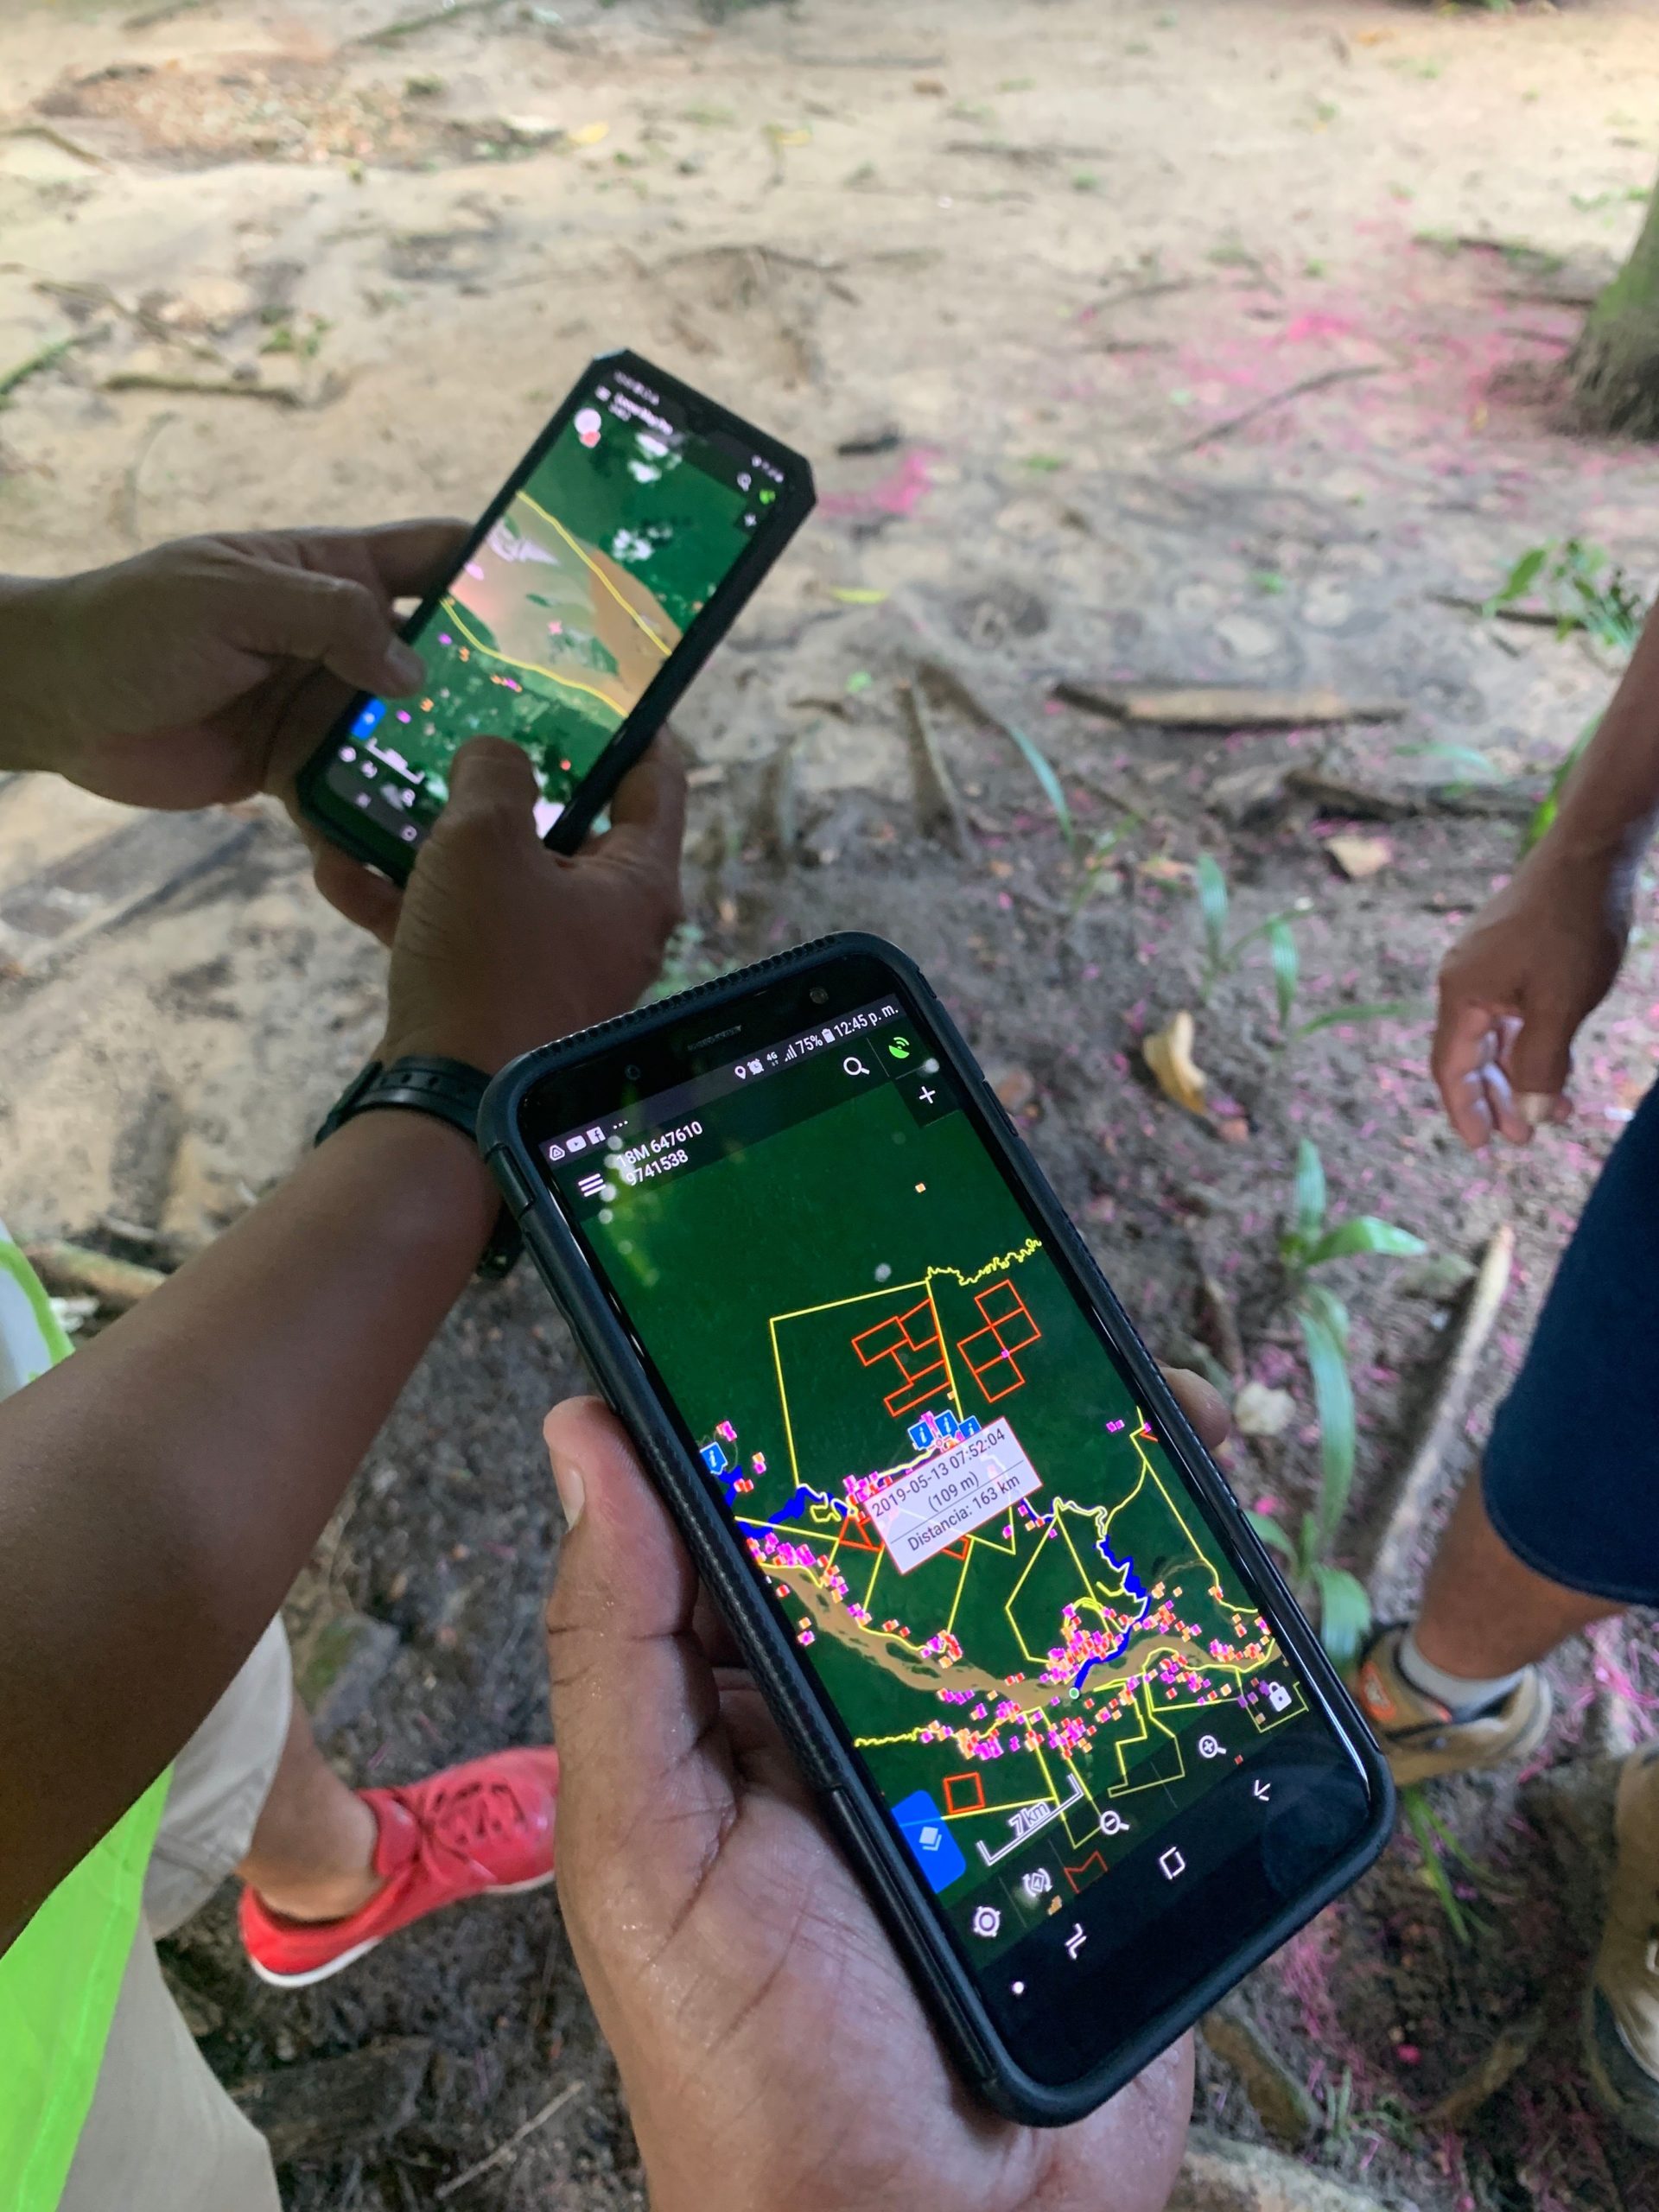 Indigenous forest monitors check deforestation alerts on their phones.